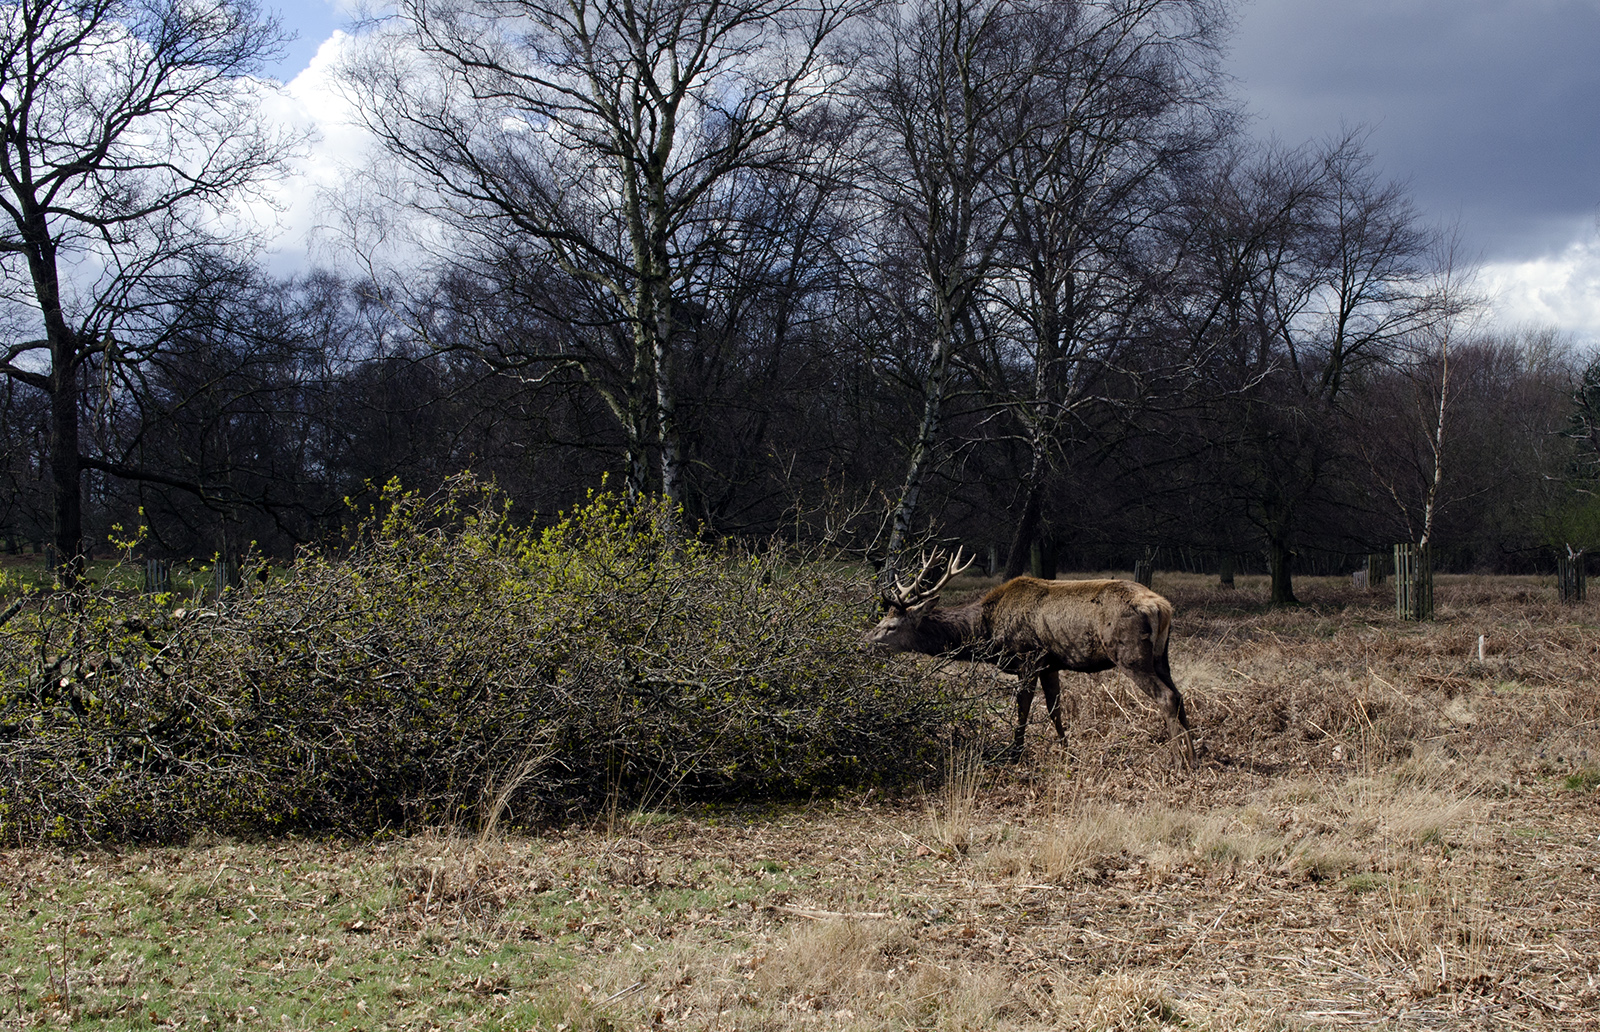 2016-03-29-Richmond-Park-After-the-Storm-Fallen-Tree-creates-delicacy-for-deer